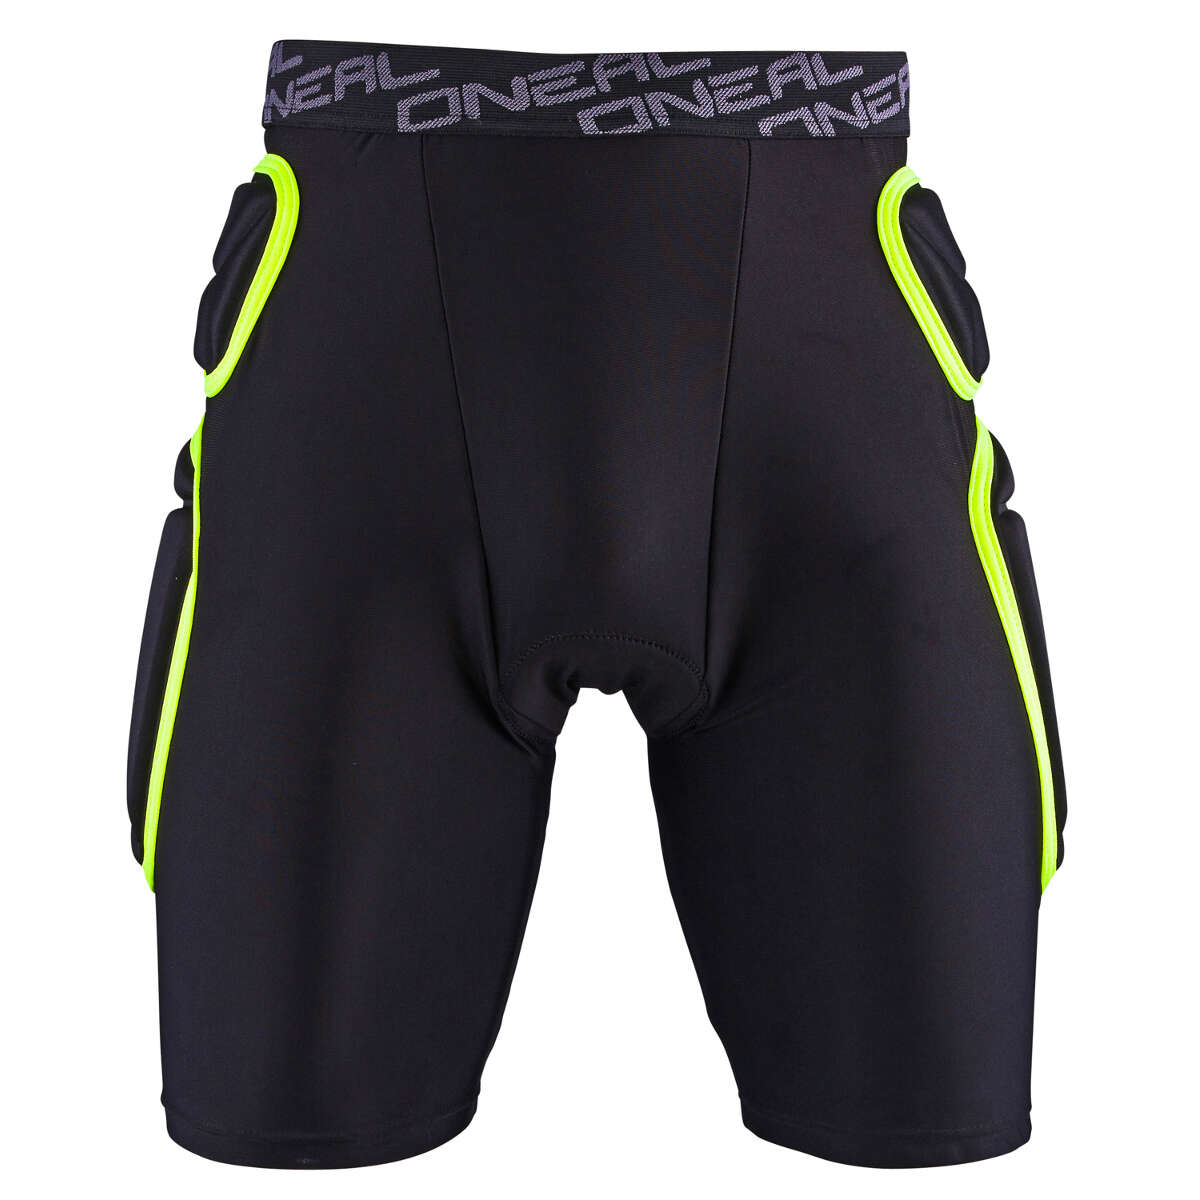 O'Neal Protector Short Trail Lime Green/Black